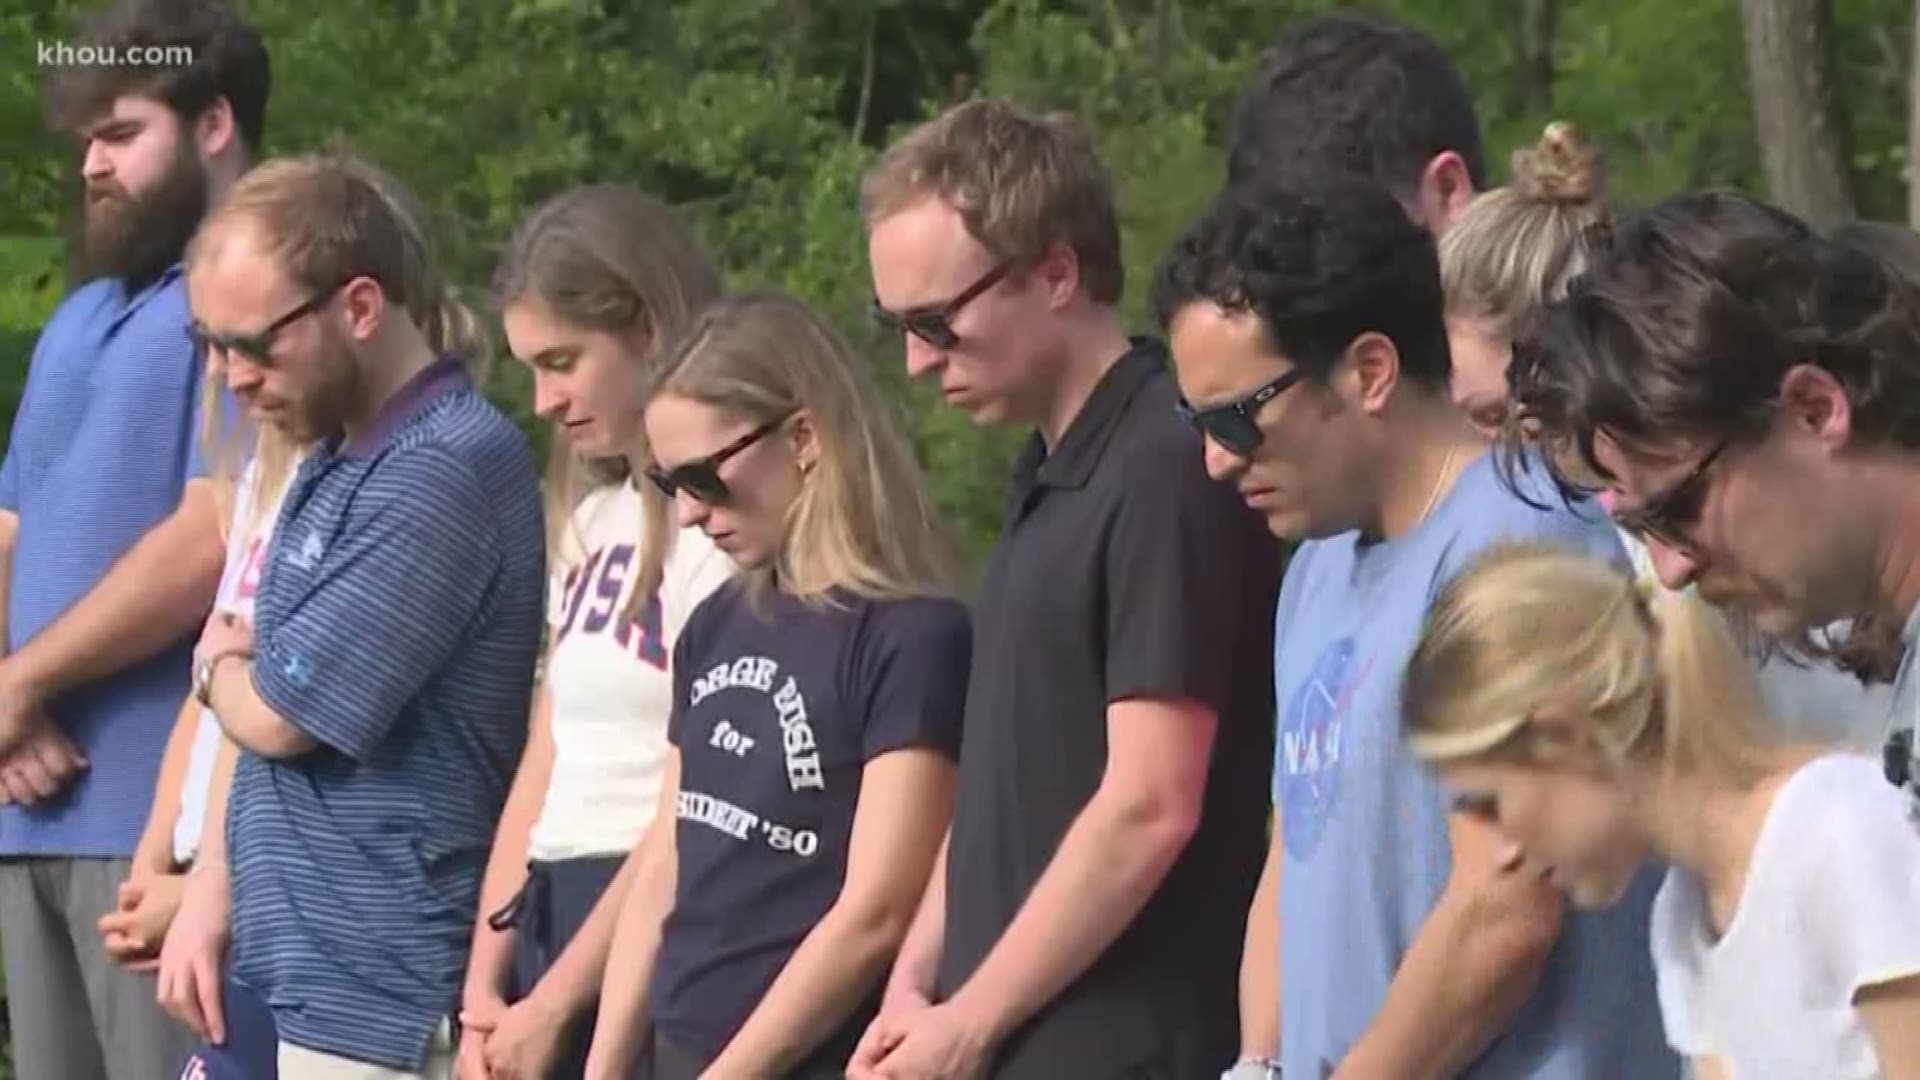 The Bush grandkids gathered in College Station at the Presidential Library on Saturday to honor their grandparents by jumping out of a plane. The president was known for going skydiving. The weather did not cooperate and they were not able to jump, but it was the first time they were all together since George H.W.'s funeral.